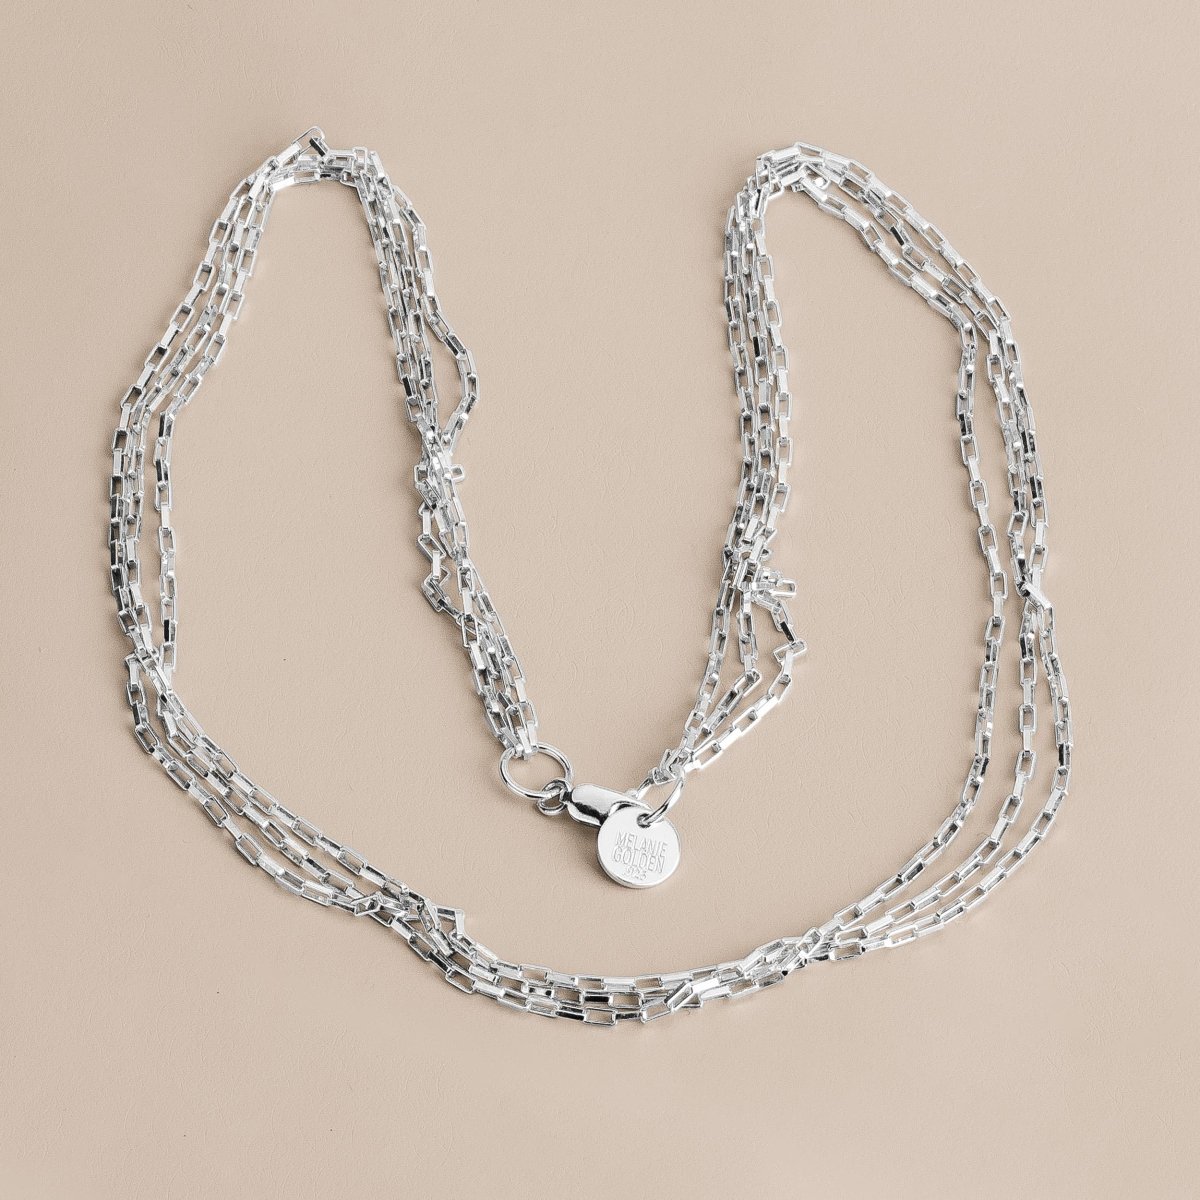 Triple Box Chain Necklace - Melanie Golden Jewelry - _badge_NEW, chain necklaces, essential chains, everyday, necklaces, New